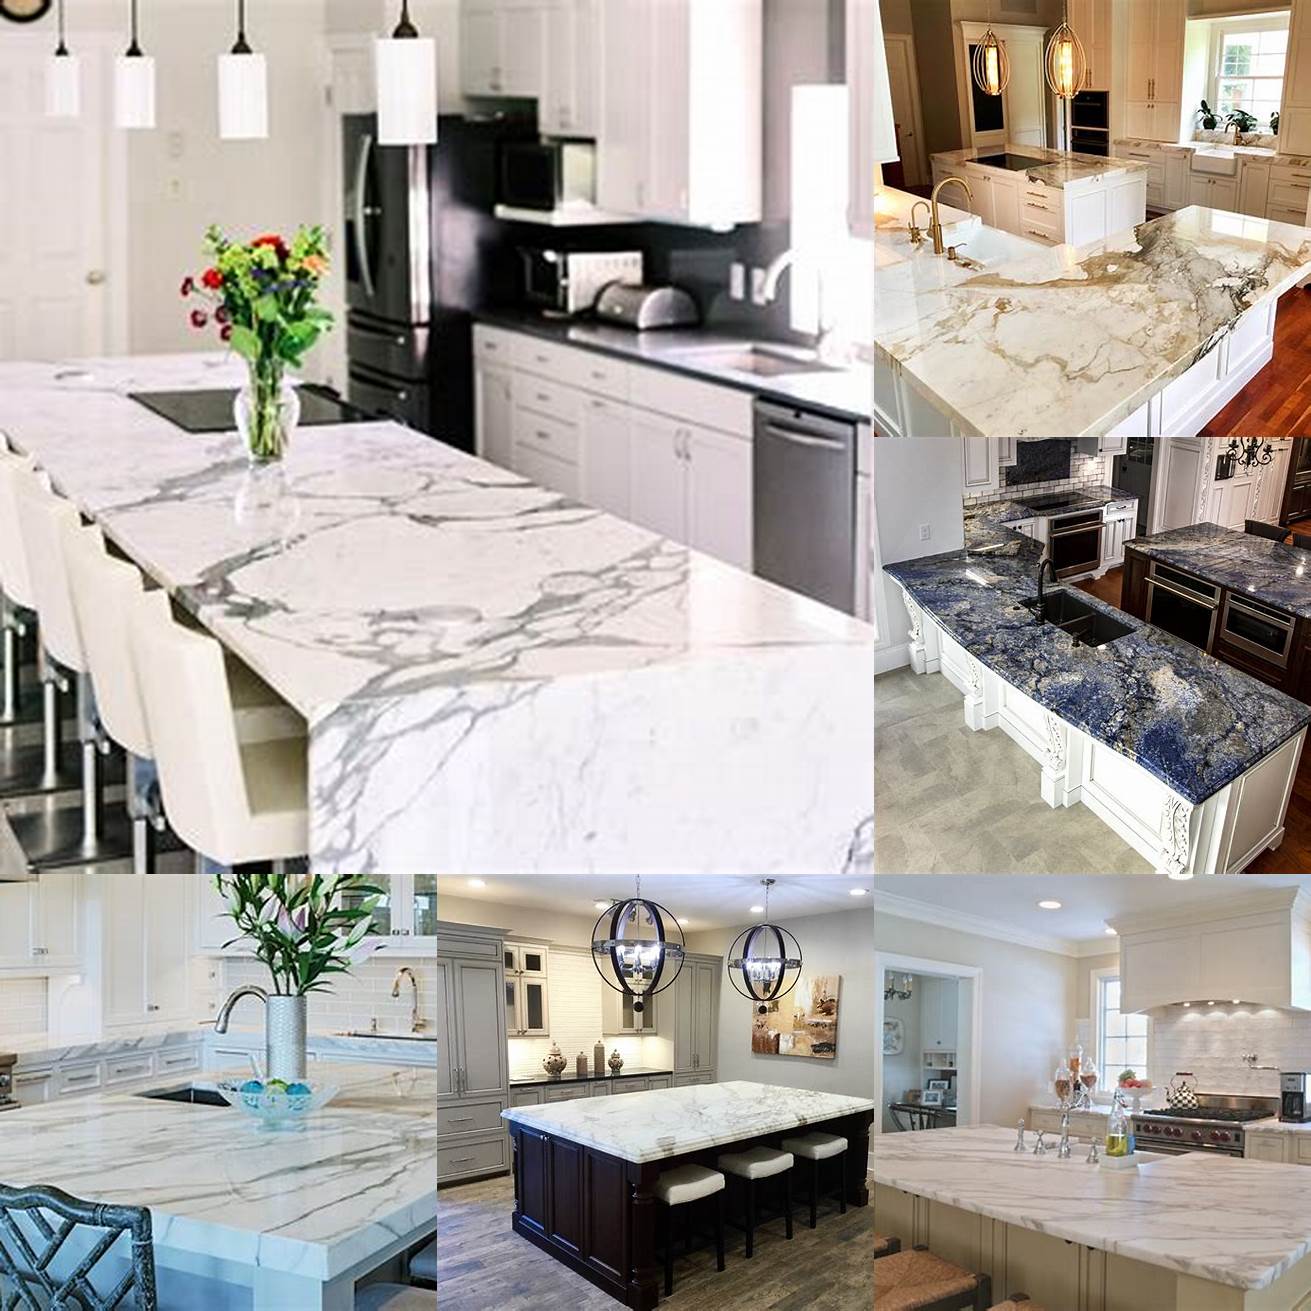 High-quality marble countertop